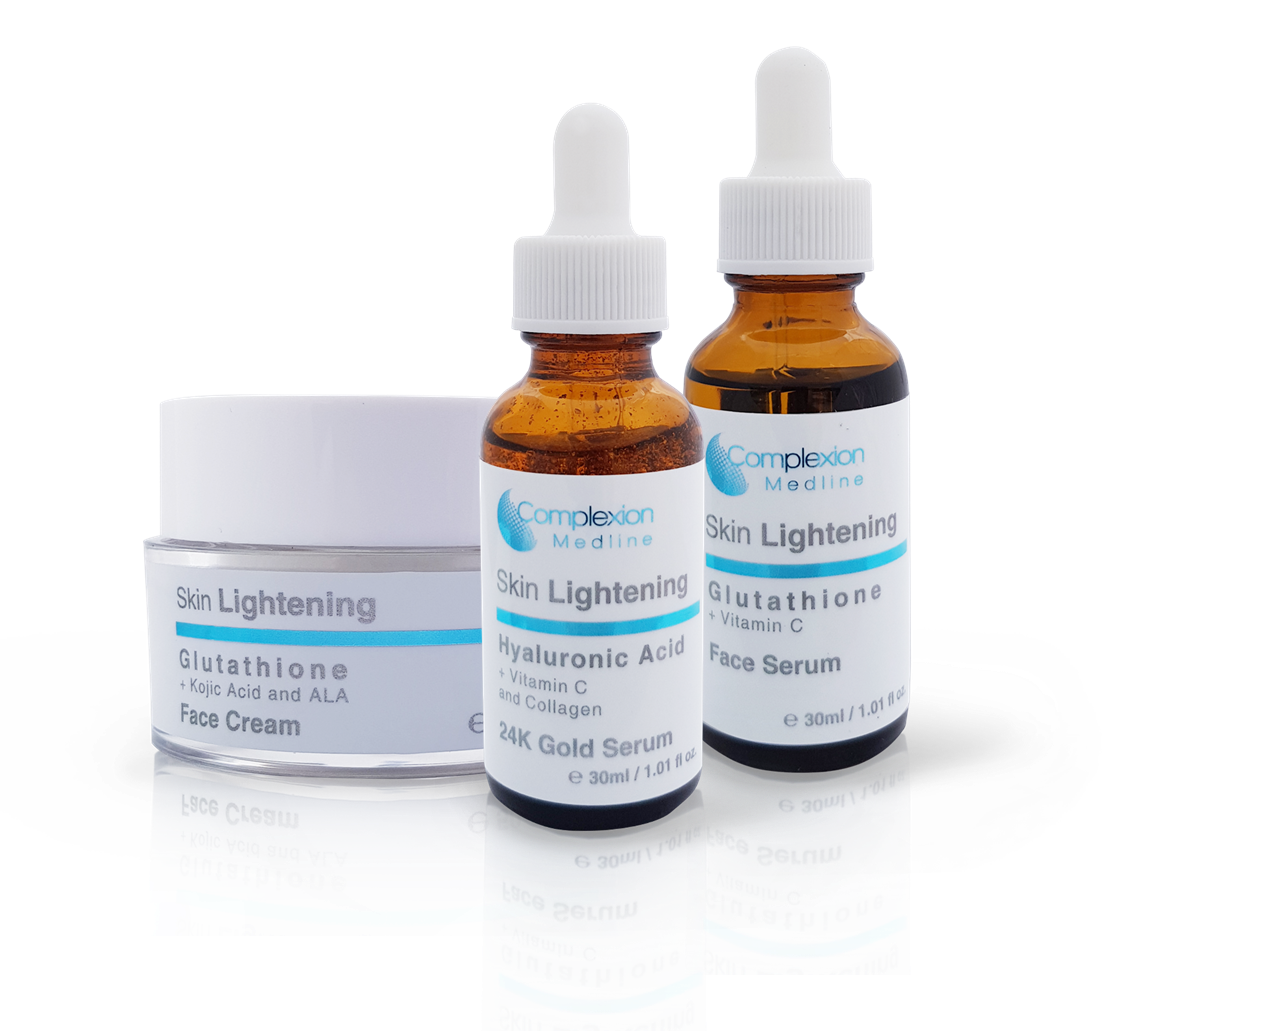 Complexion skin lightening trio - face serum with hyaluronic acid vitamin C and Collagen